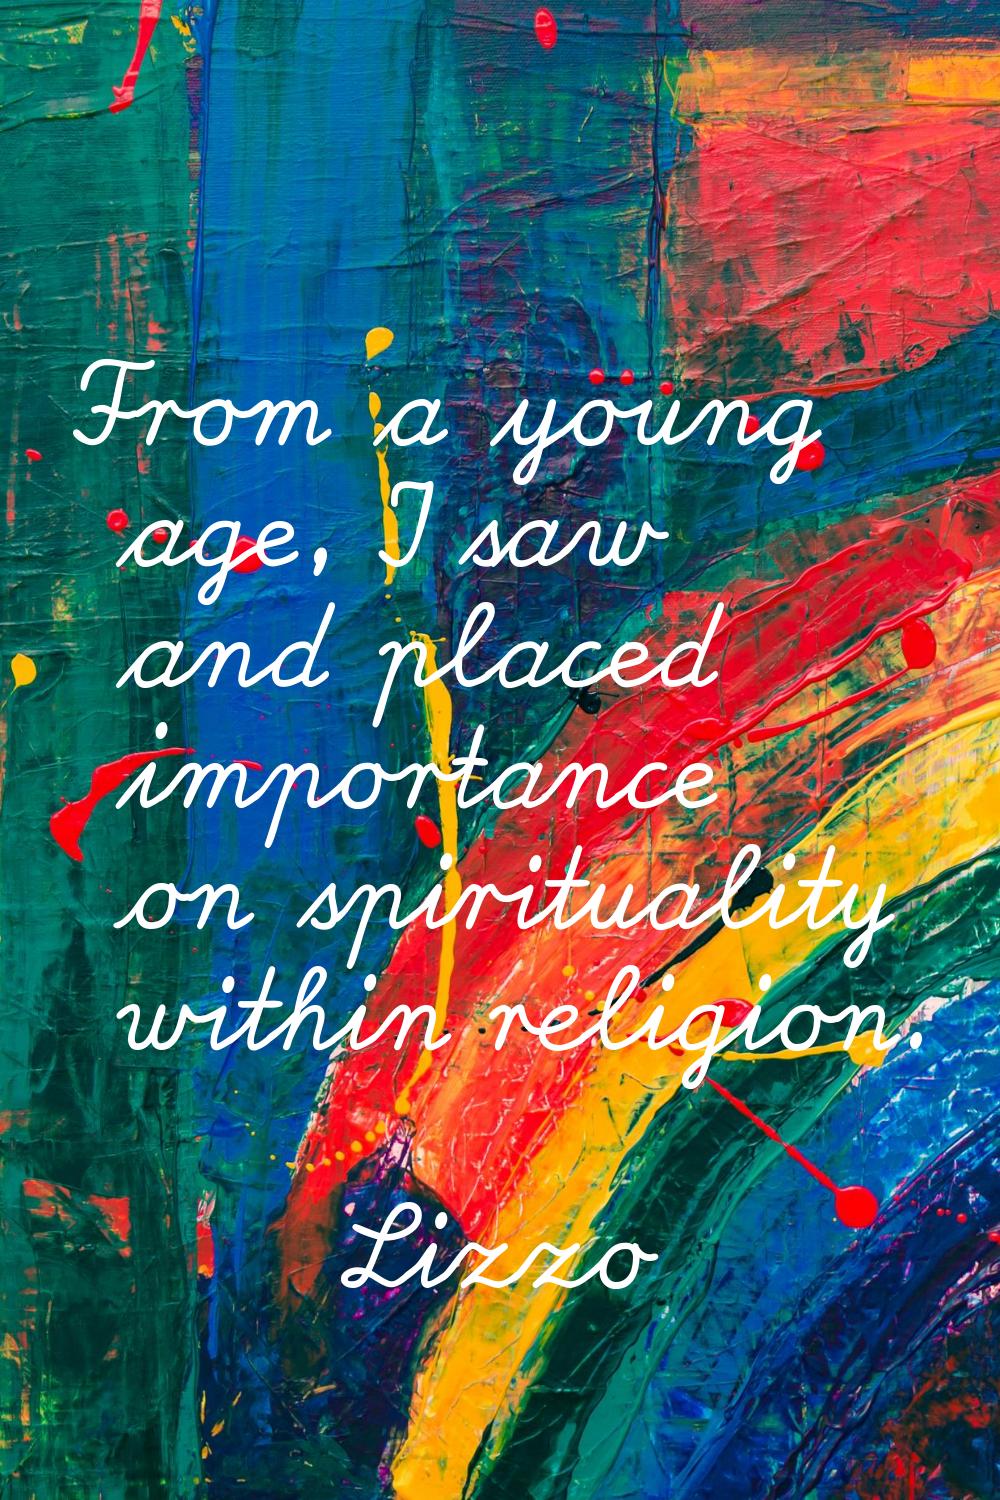 From a young age, I saw and placed importance on spirituality within religion.